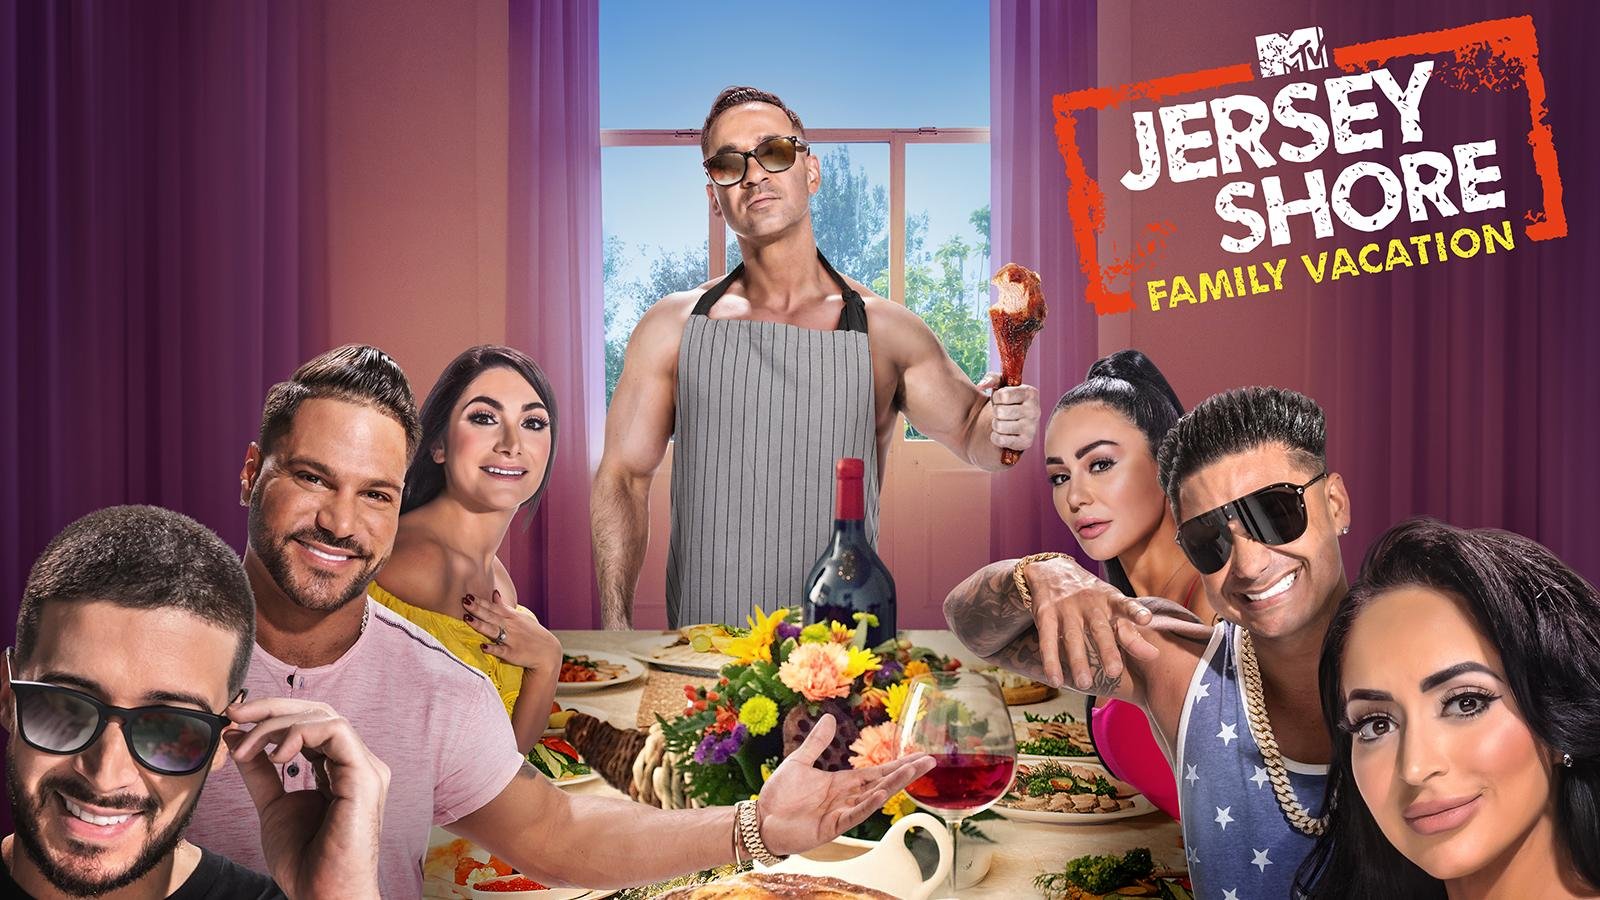 PapoeaNieuwGuinea Twisted plotseling Watch Jersey Shore Family Vacation Online - Stream Full Episodes